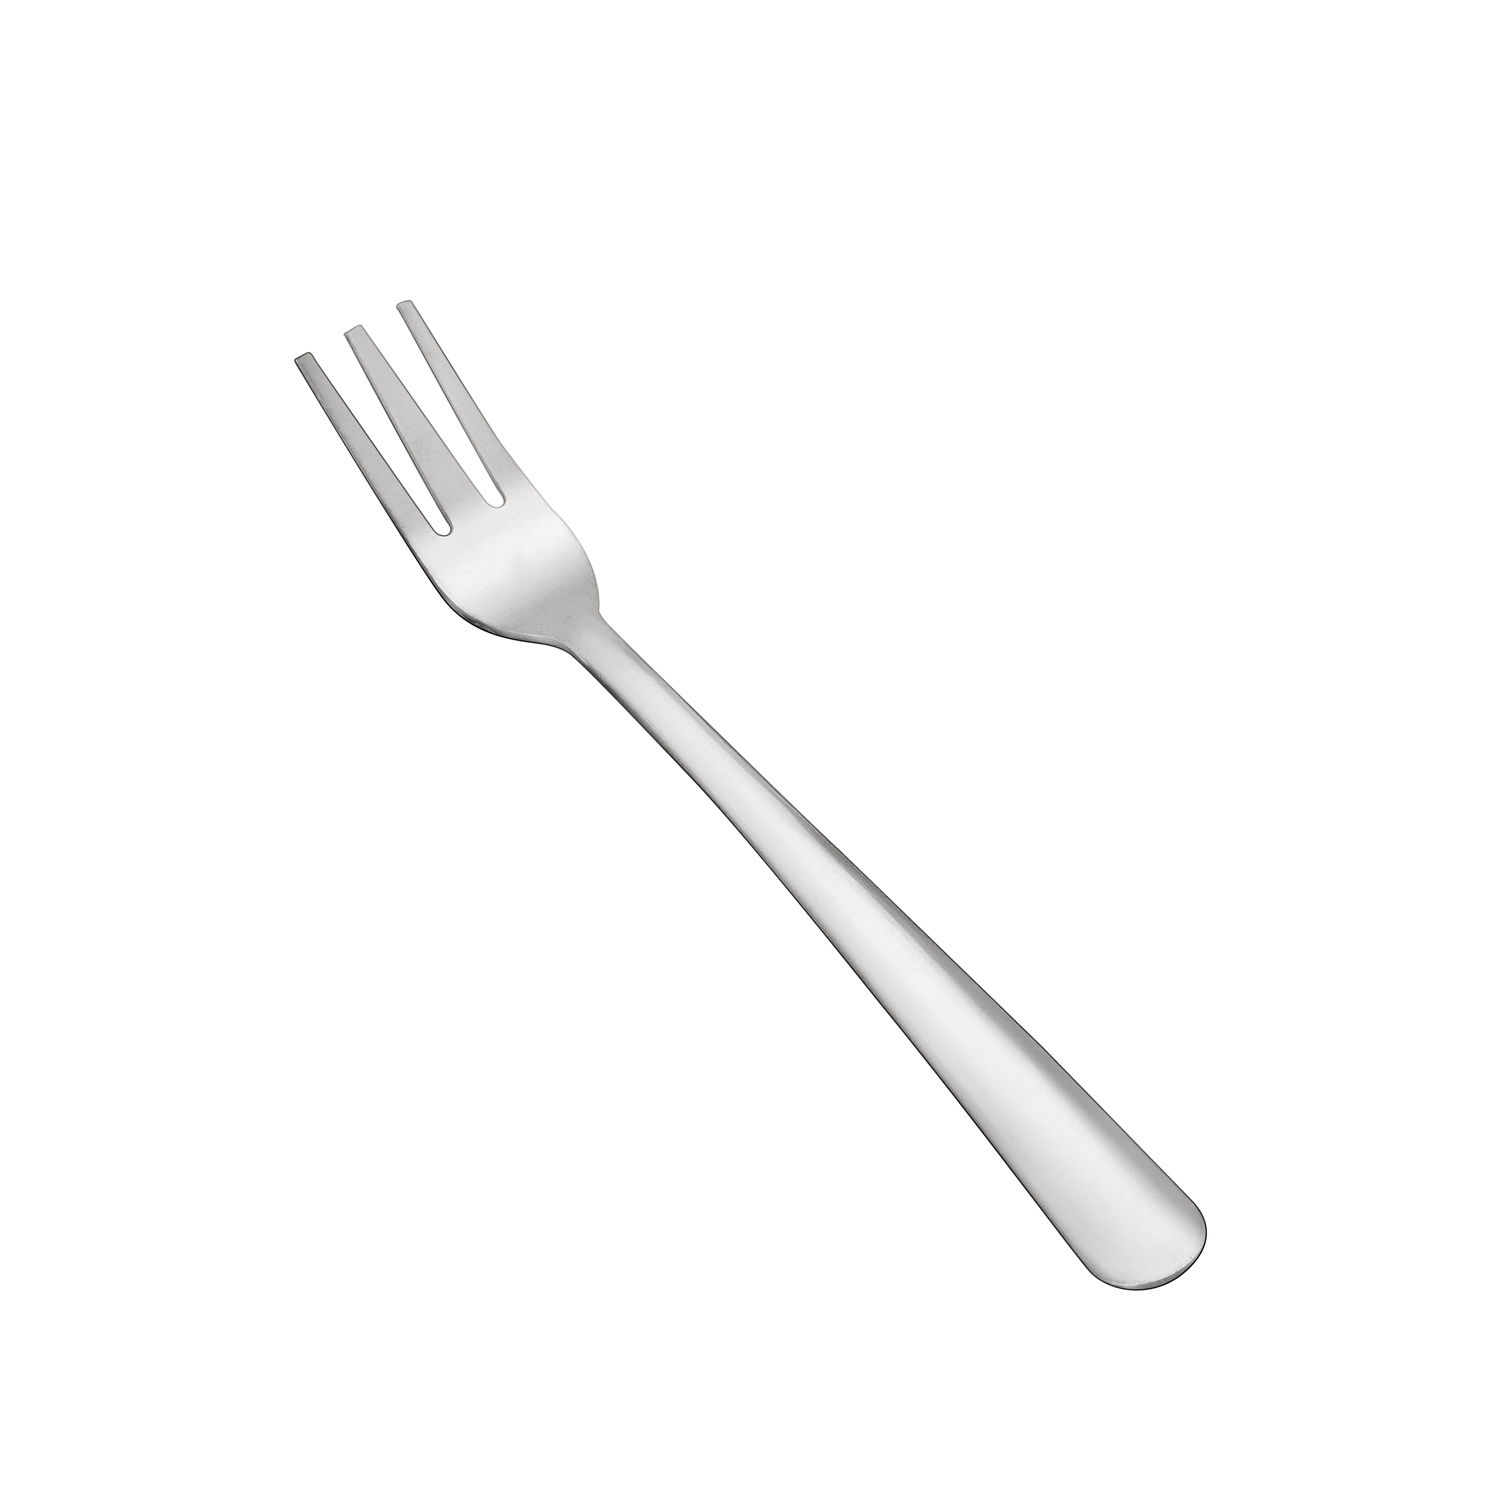 CAC China 1002-07 Windsor Oyster Fork, Medium Weight 18/0, 5 1/2"